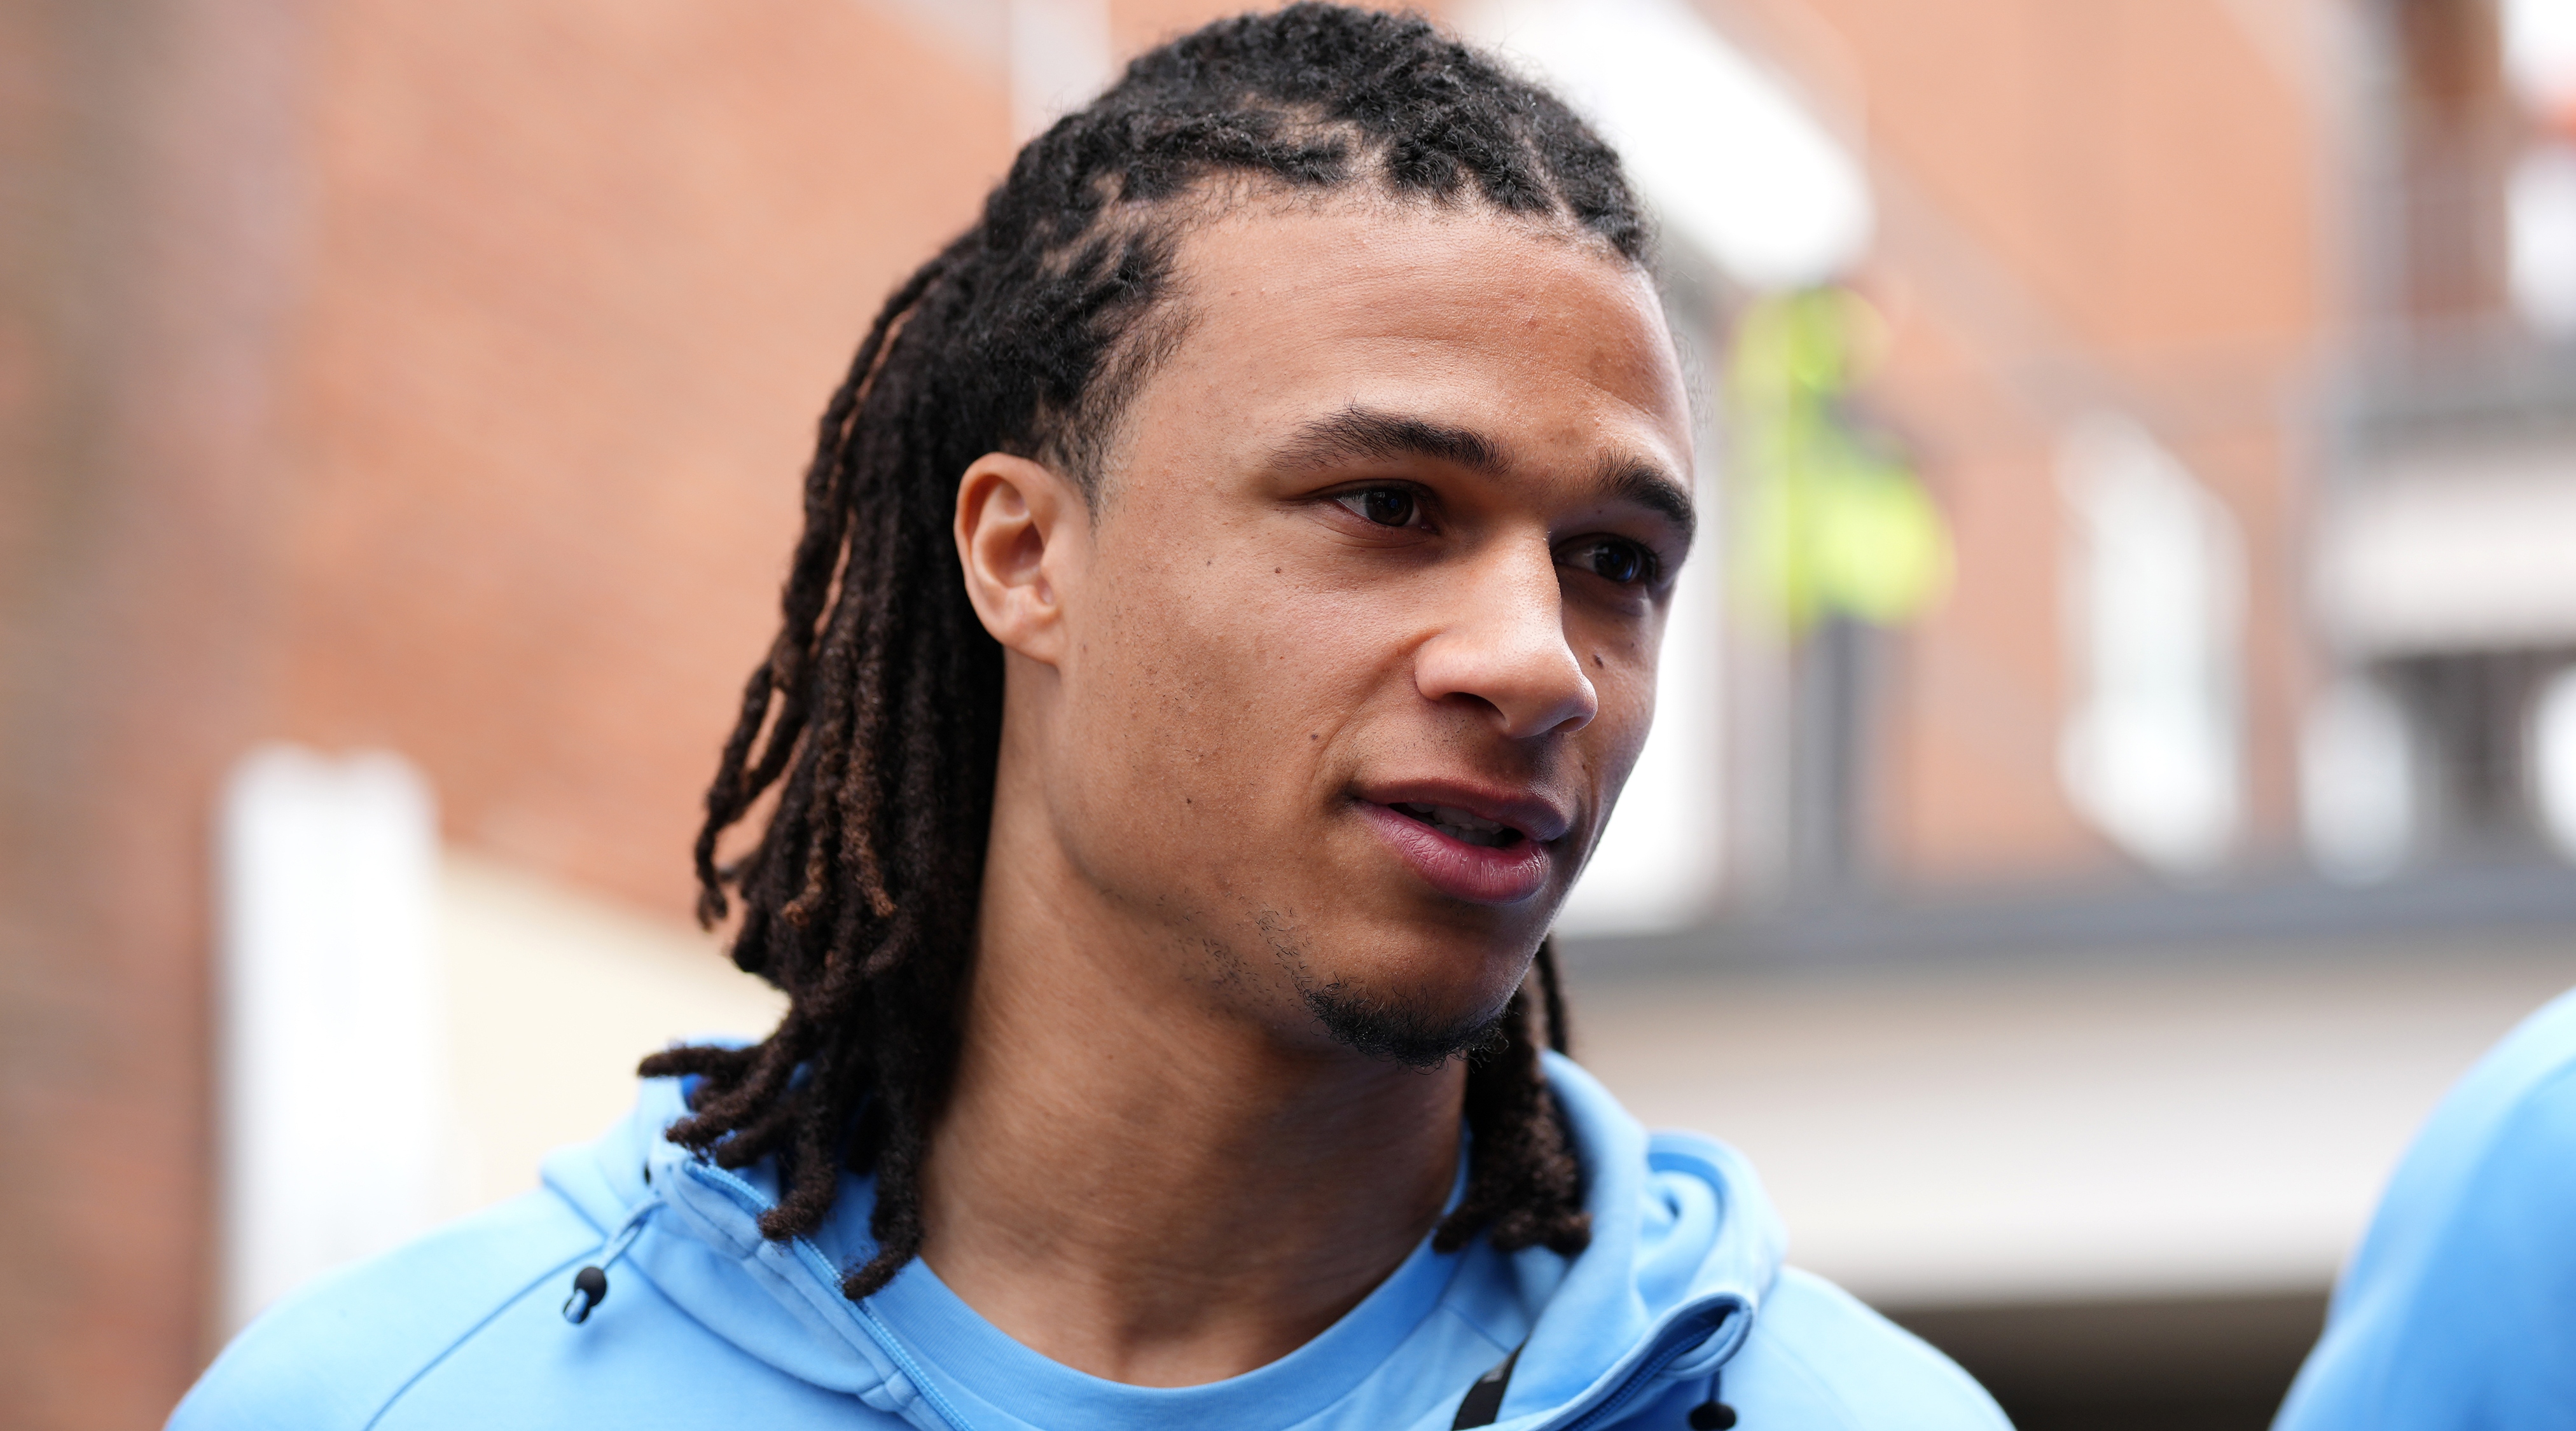 Nathan Ake of Manchester City arrives at the stadium prior to the Premier League match between Crystal Palace and Manchester City at Selhurst Park on March 11, 2023 in London, England.